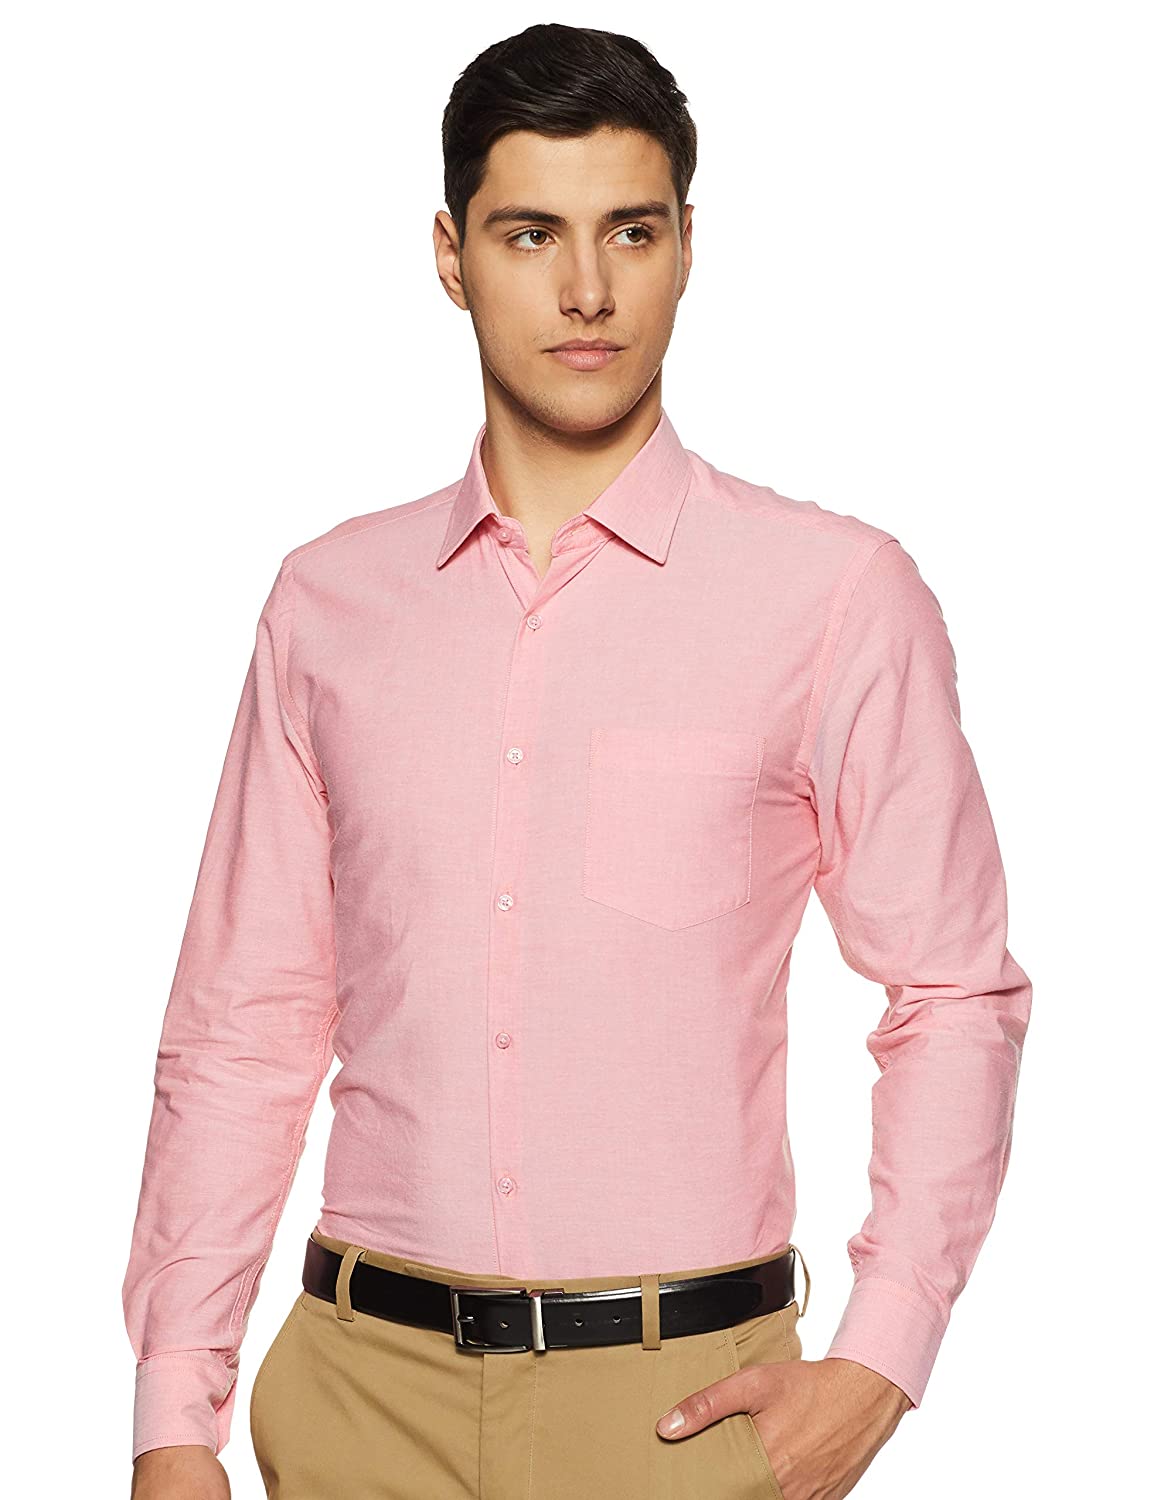 Pink / S Men's Regular Fit Formal Long Sleeve Casual Business Party Dress Shirts with Chest Pocket The Orange Tags